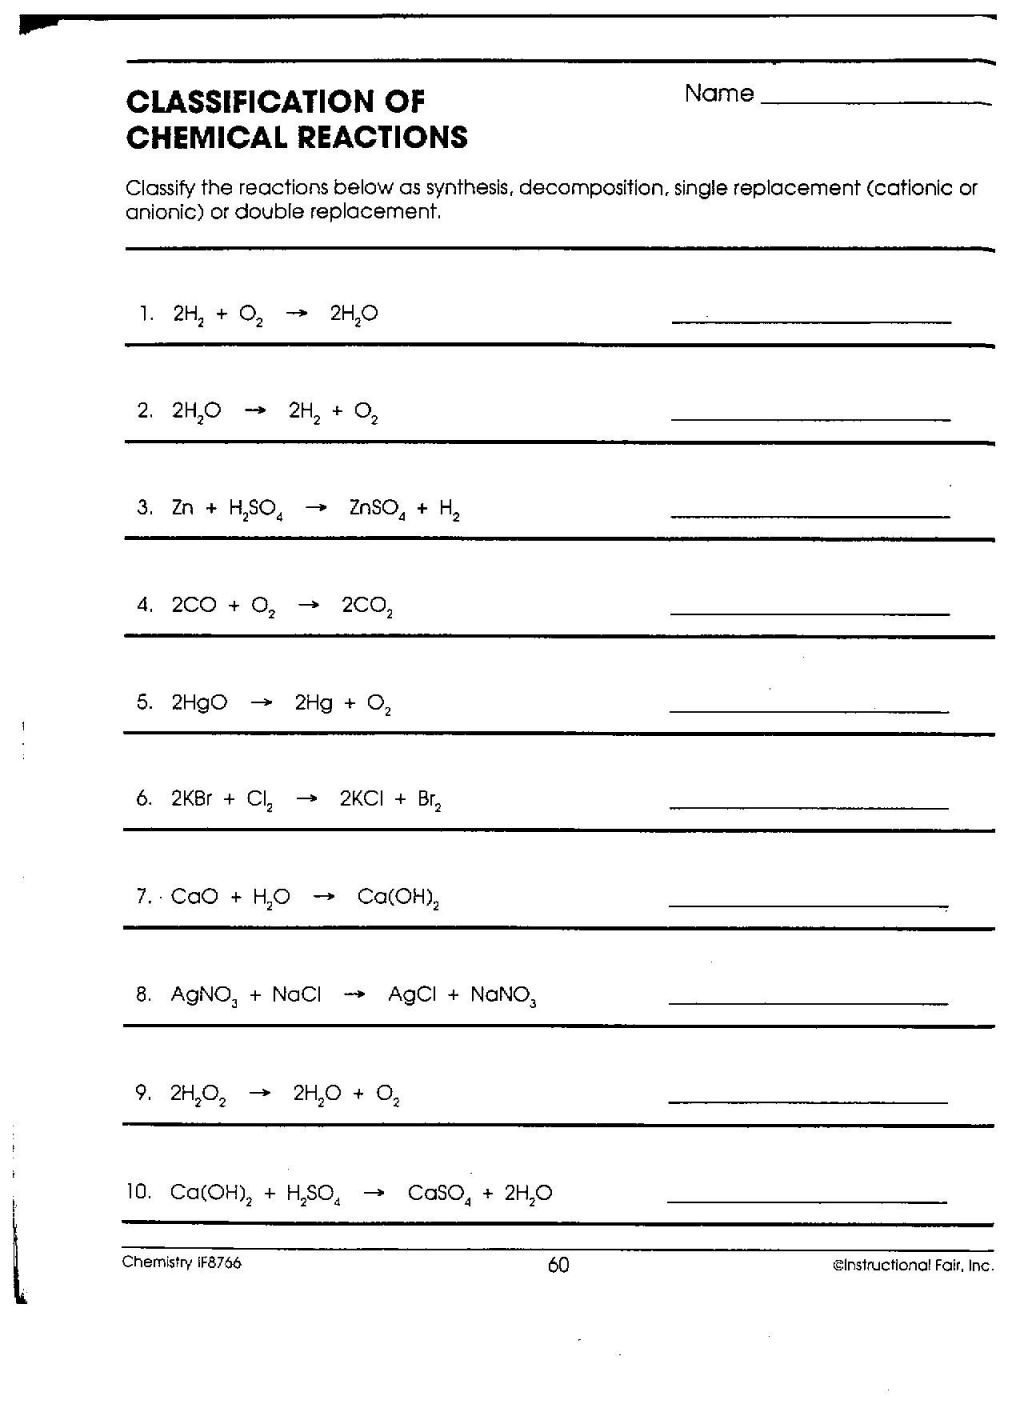 Classification Of Chemical Reactions Worksheet Multiplication Facts With Classification Of Chemical Reactions Worksheet Answers